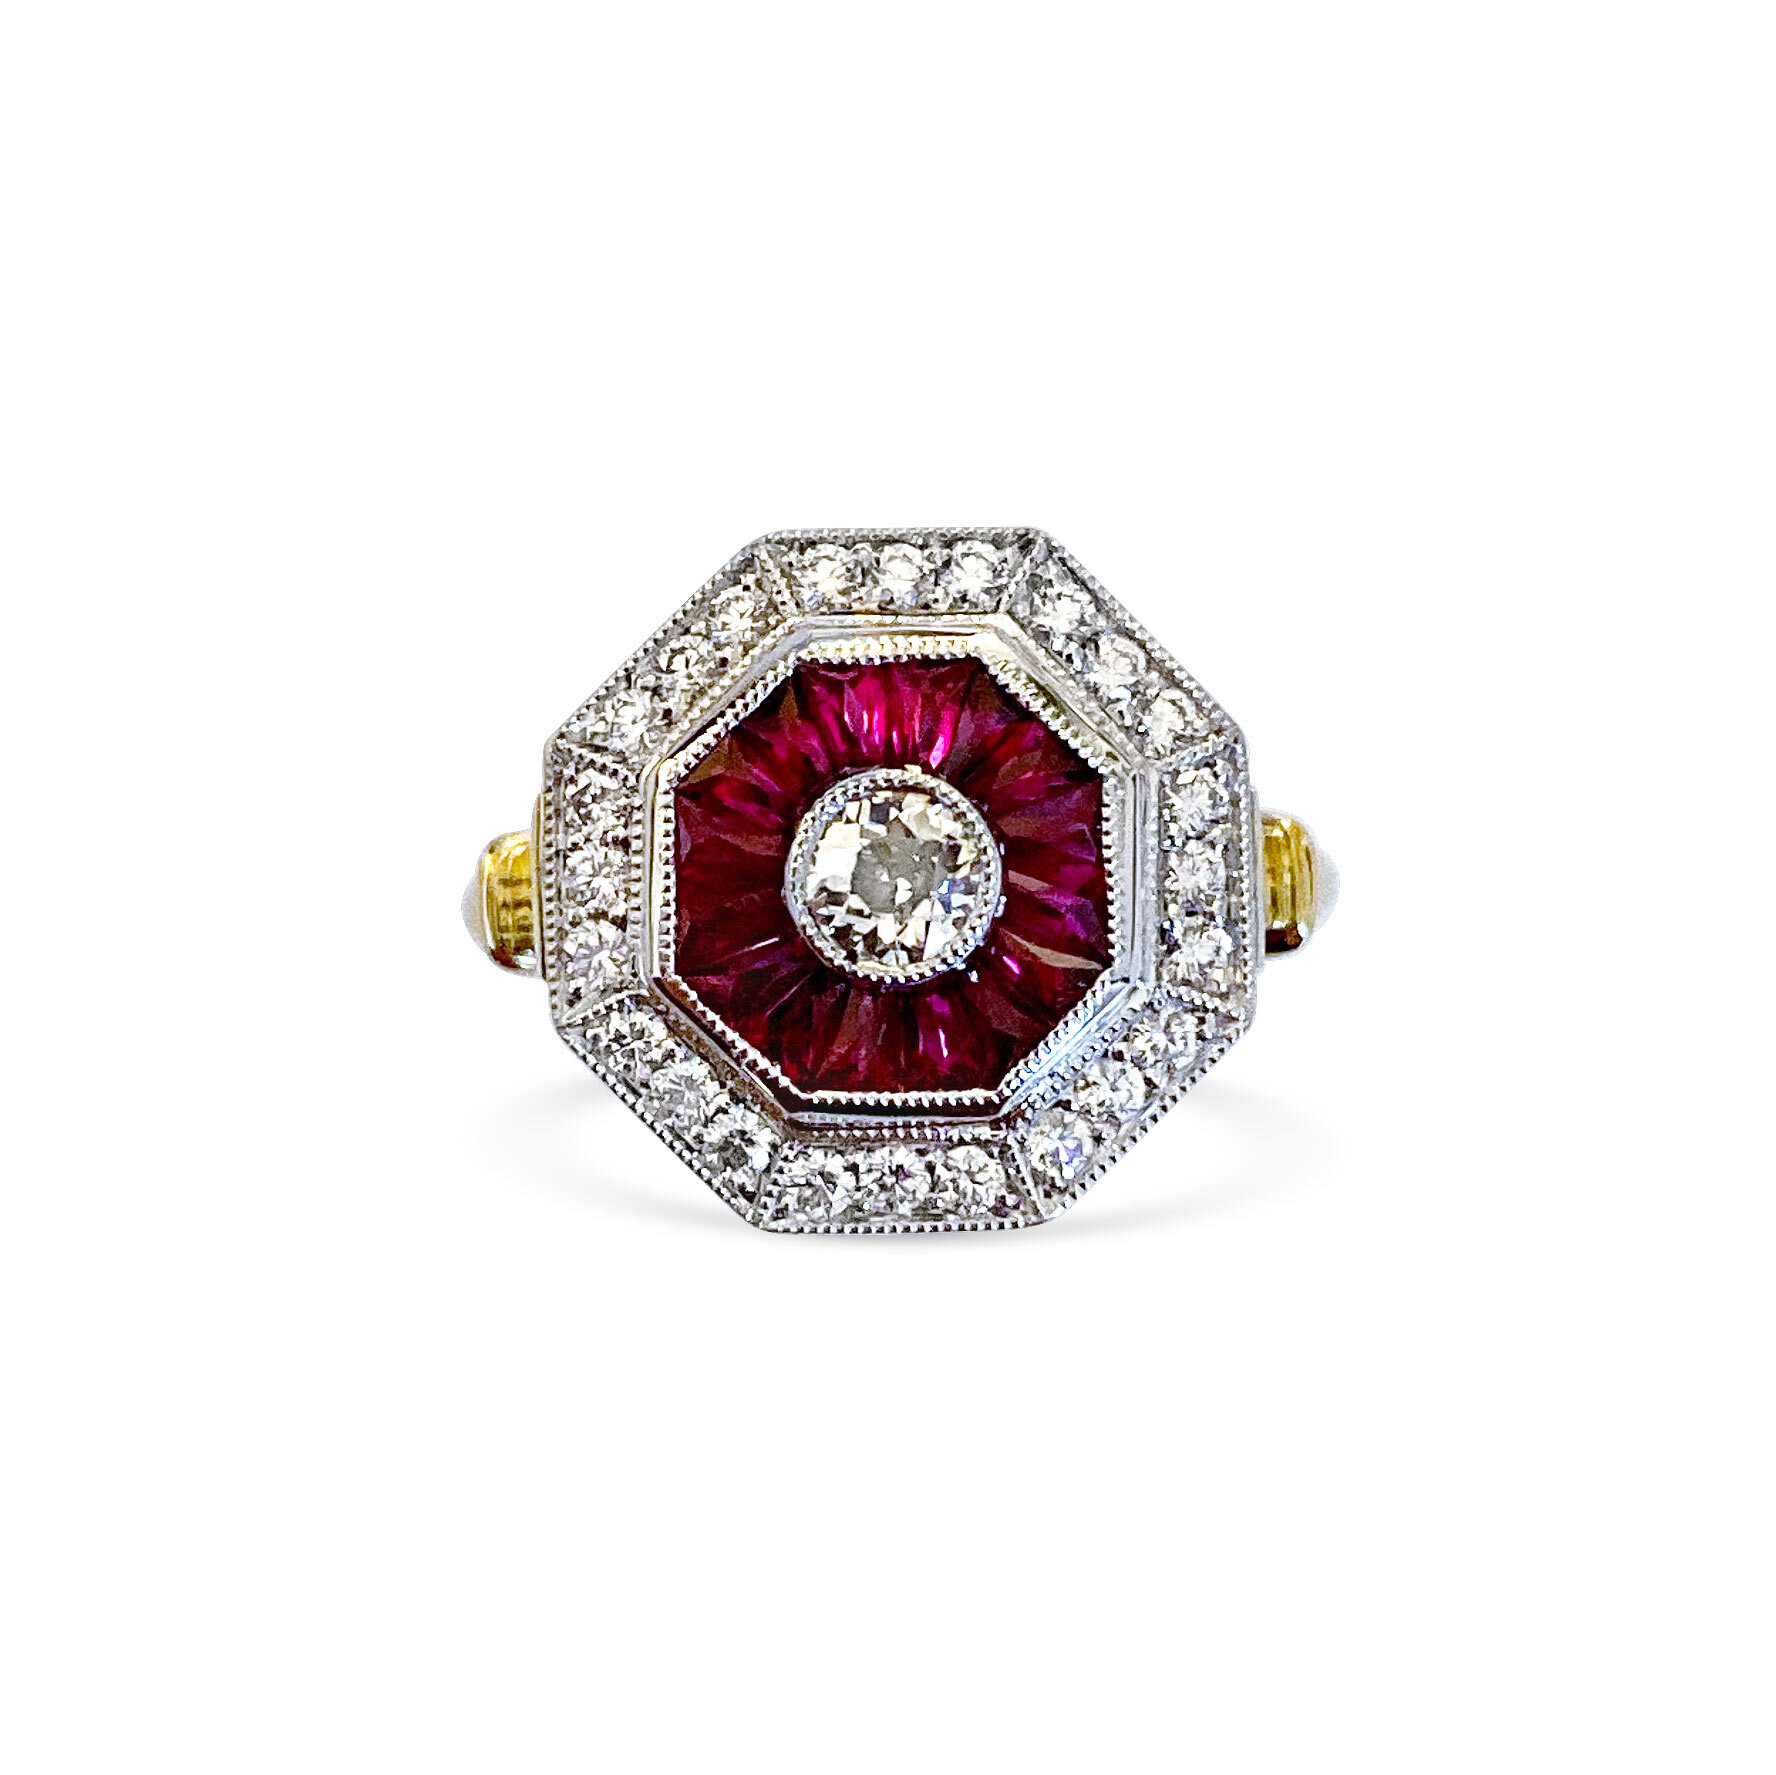 Diamond-and-french-cut-ruby-target-ring-mounted-in-18ct-yellow-gold-and-18ct-white-gold-2.jpg